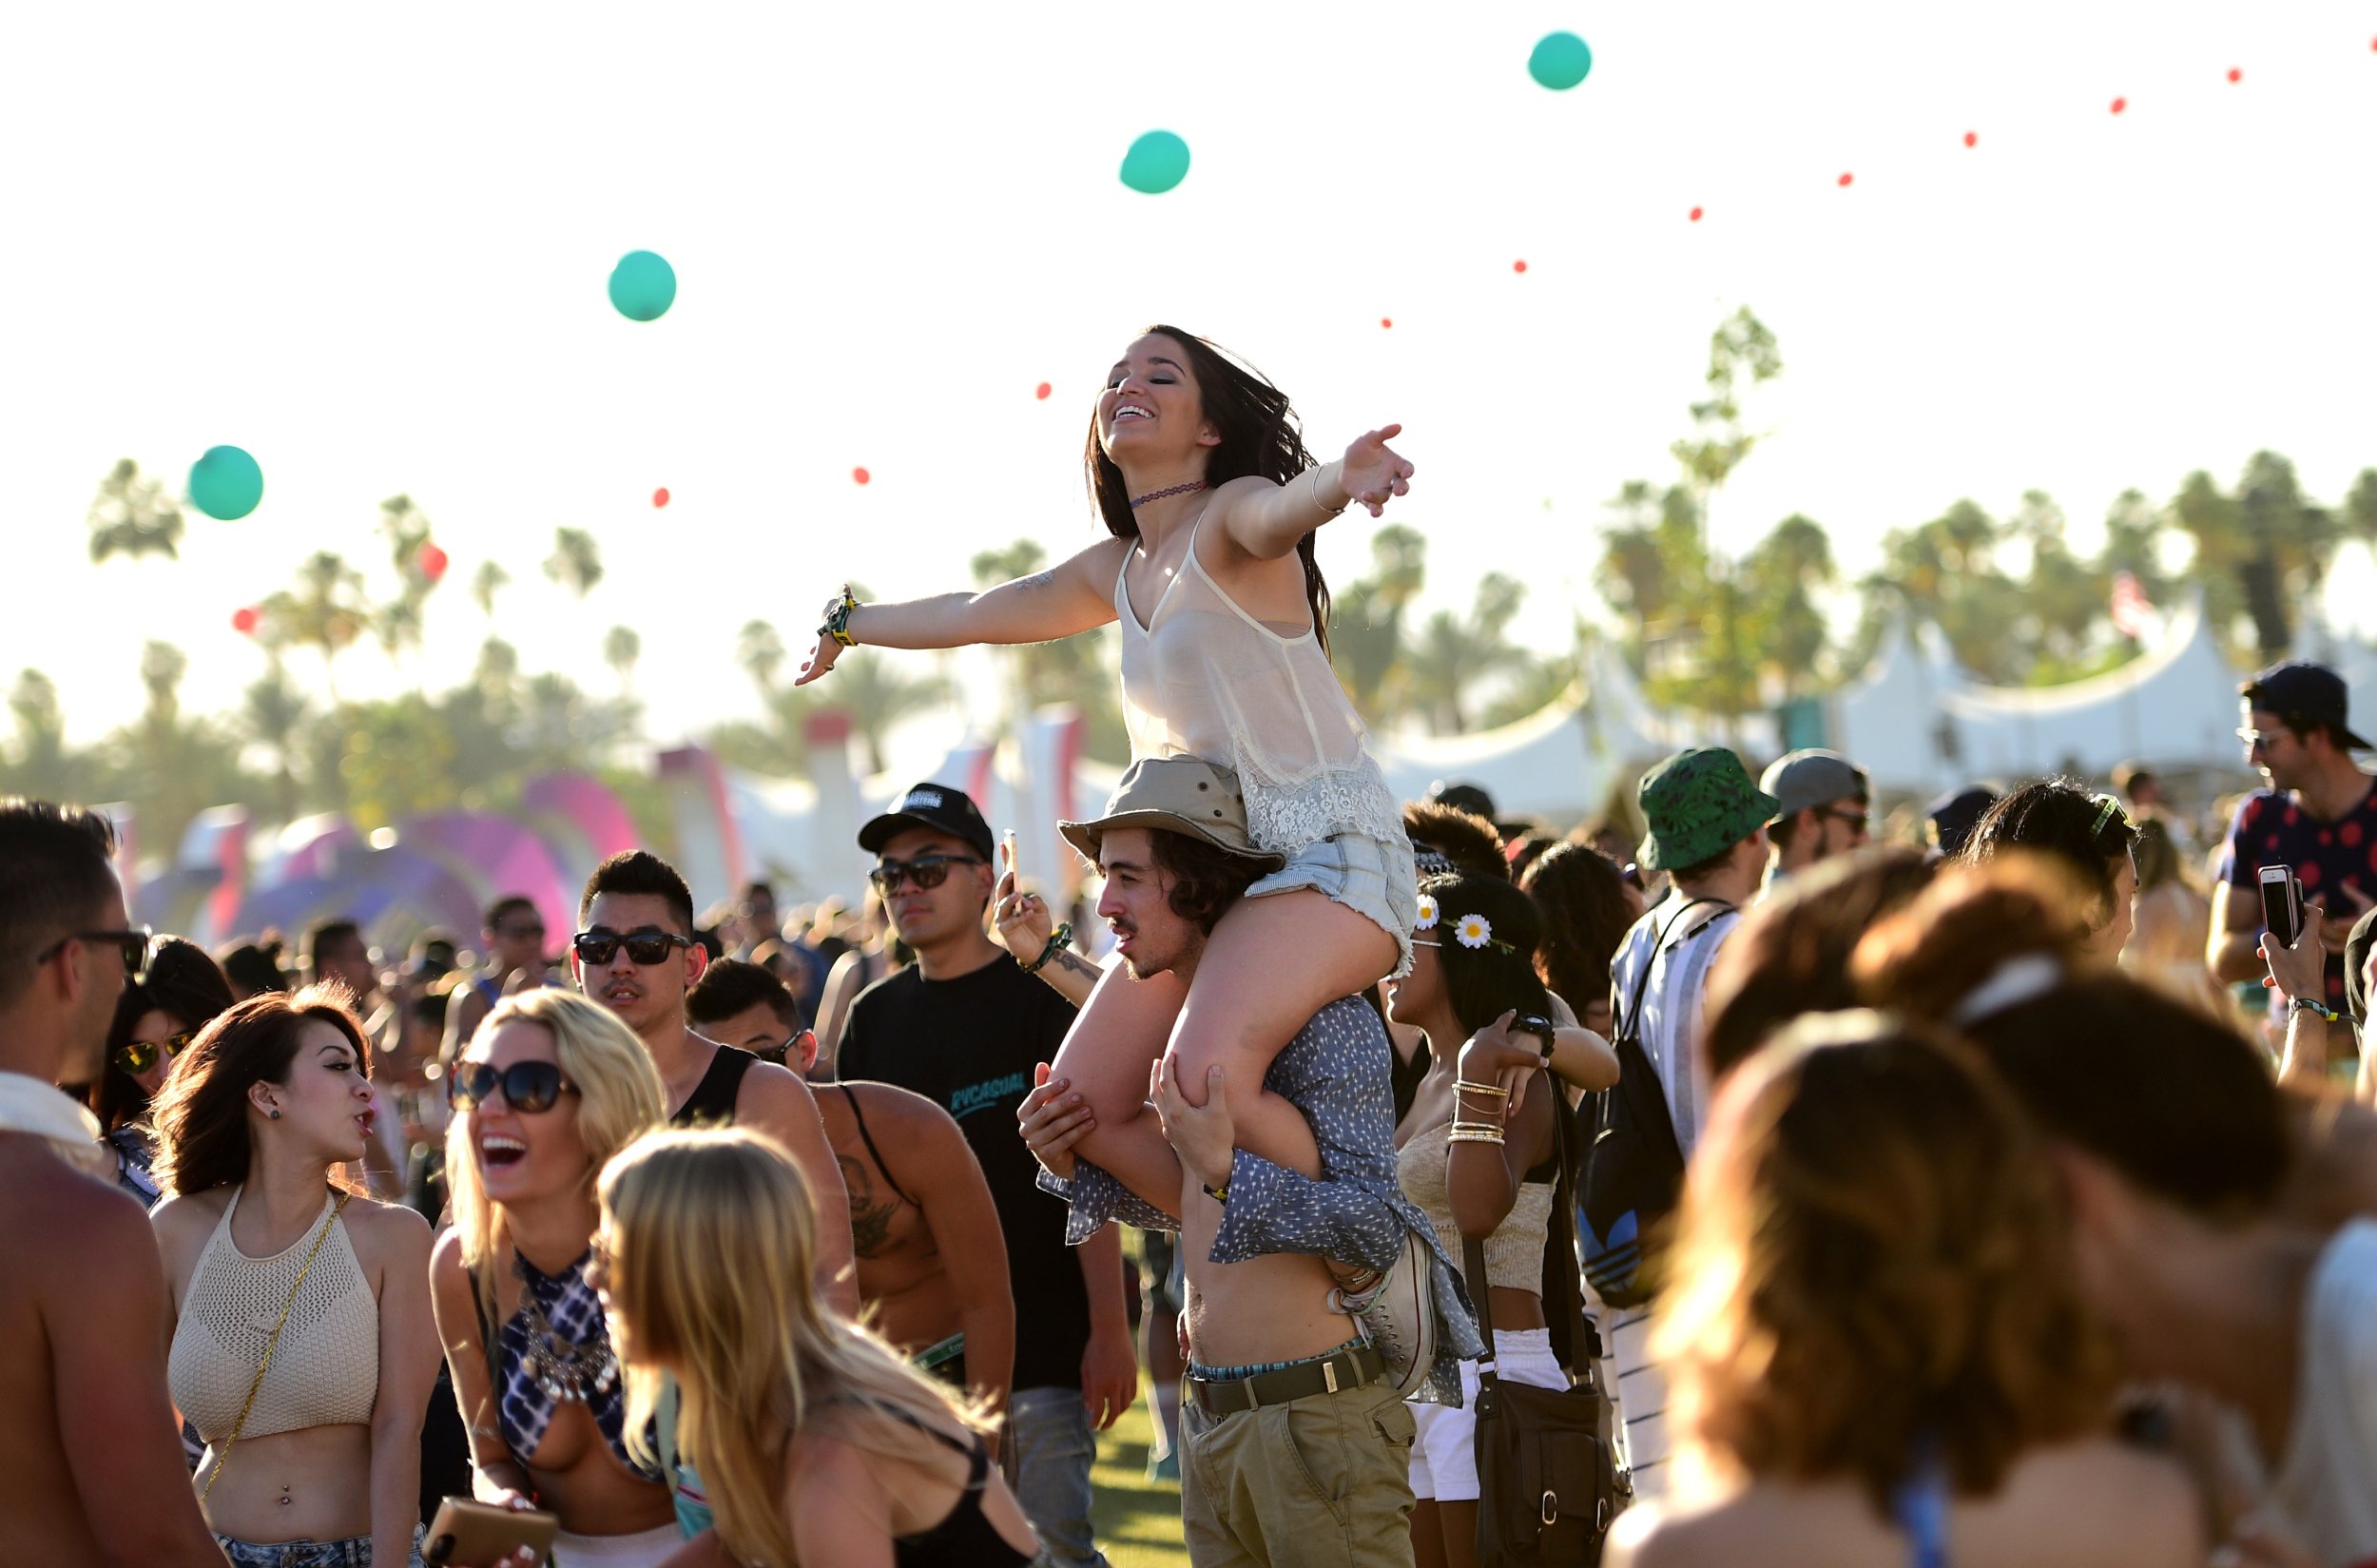 Music Festival Tips: 9 Ways To Stay Safe This Summer